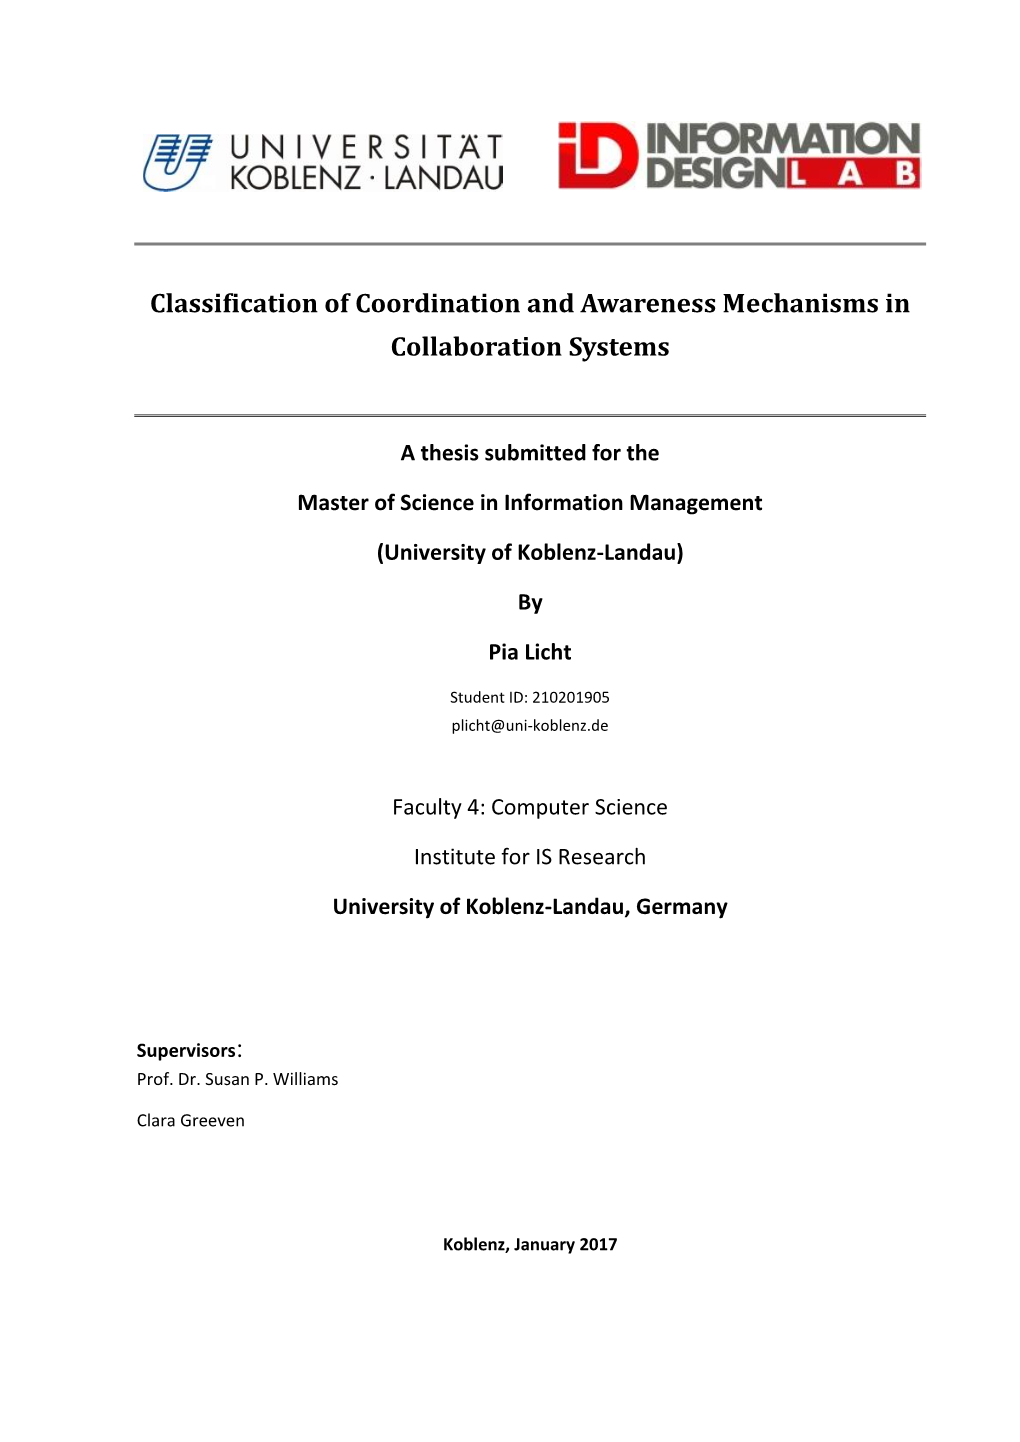 Classification of Coordination and Awareness Mechanisms in Collaboration Systems